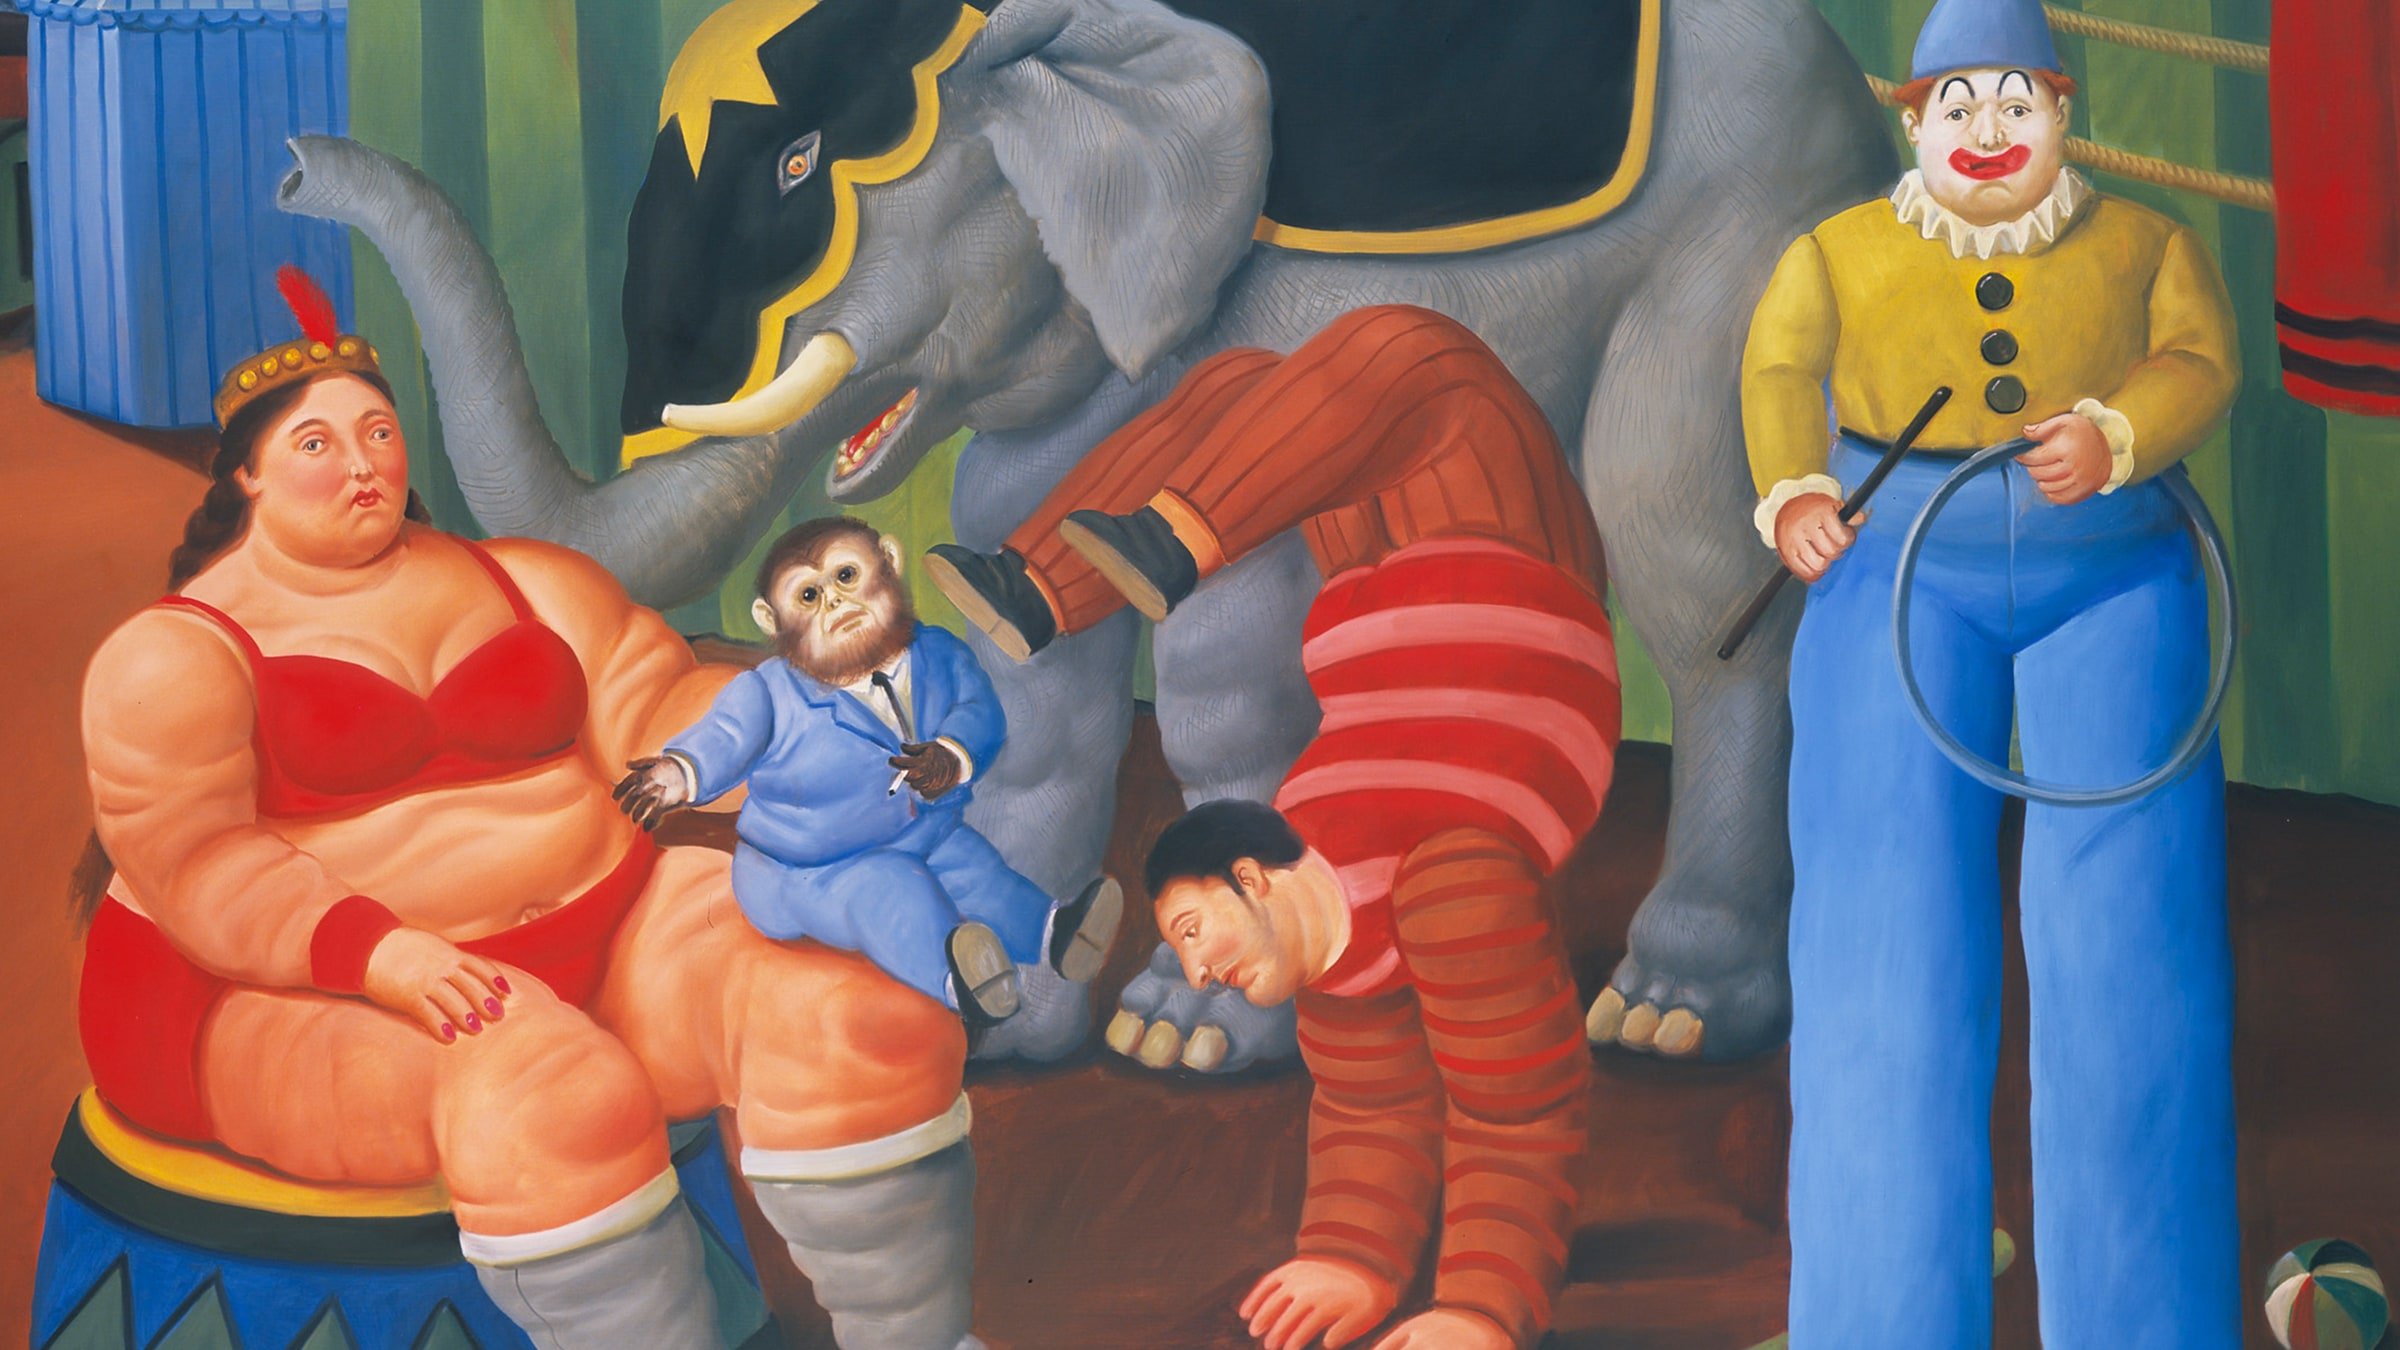 Colombia celebrates the 90th anniversary of the painter and sculptor Fernando Botero